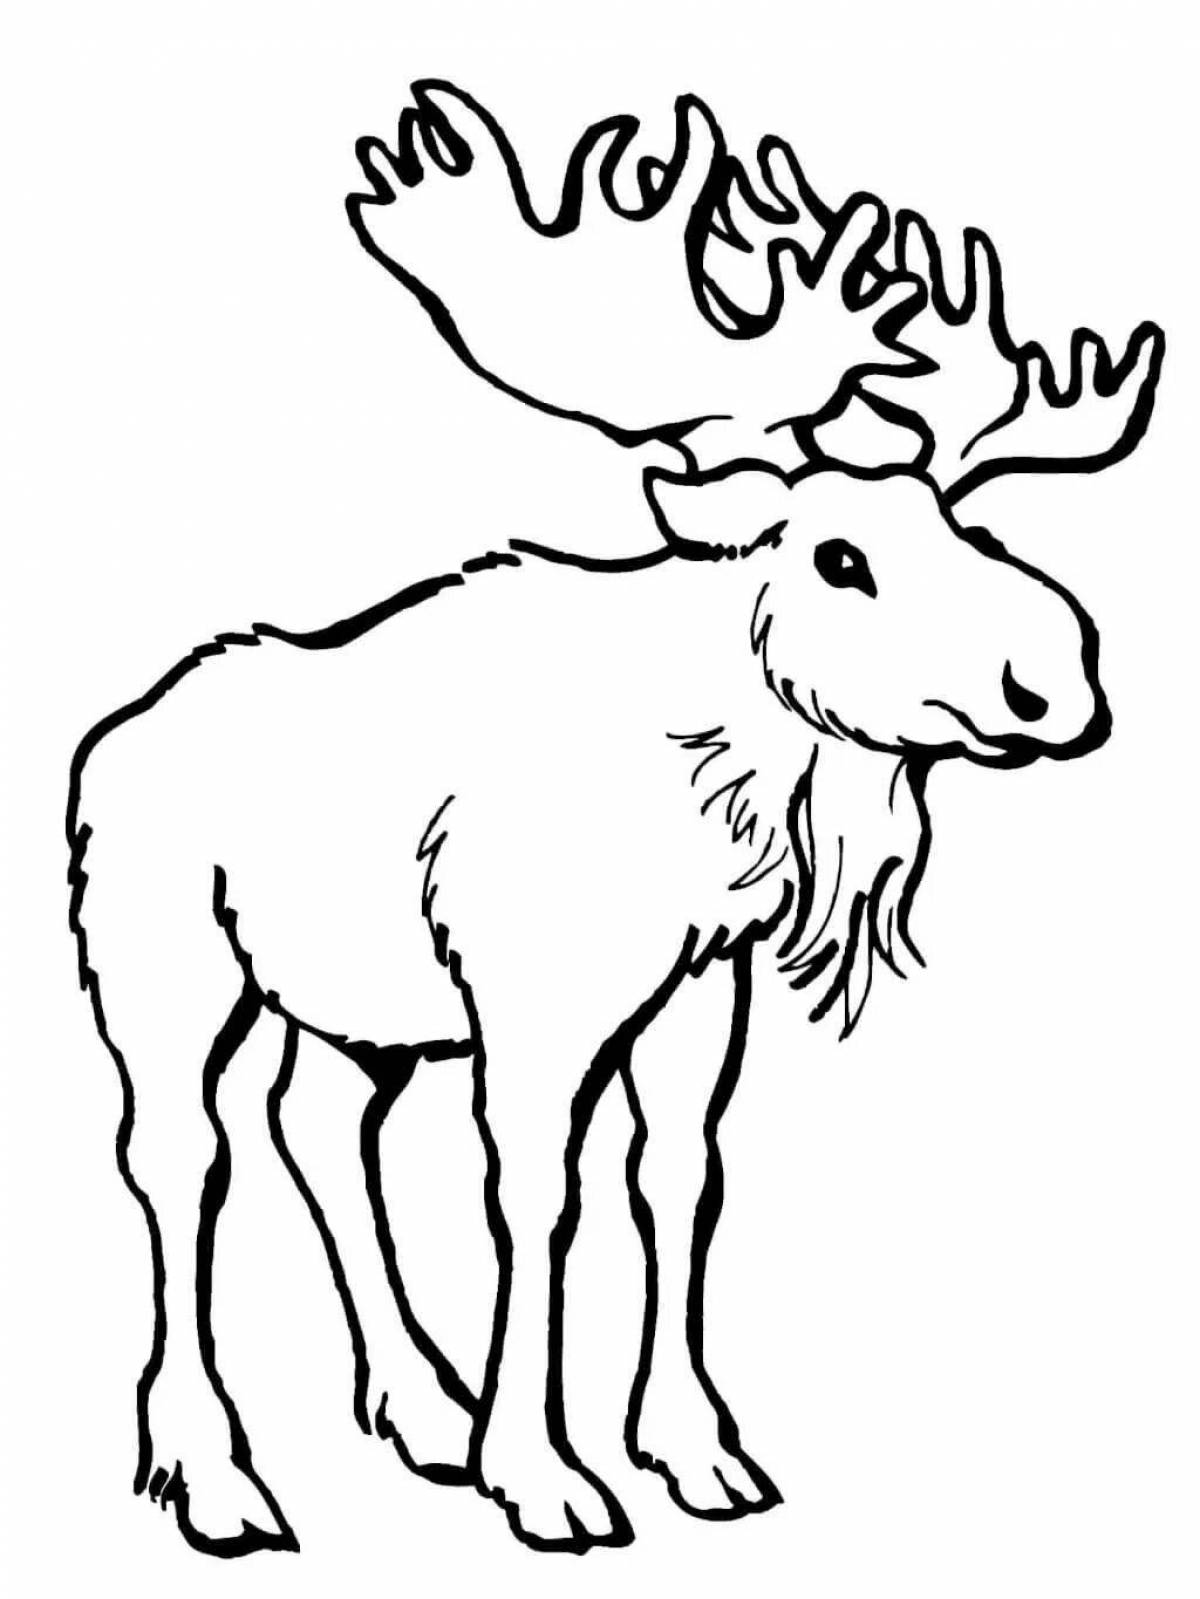 Gorgeous Moose coloring book for 6-7 year olds